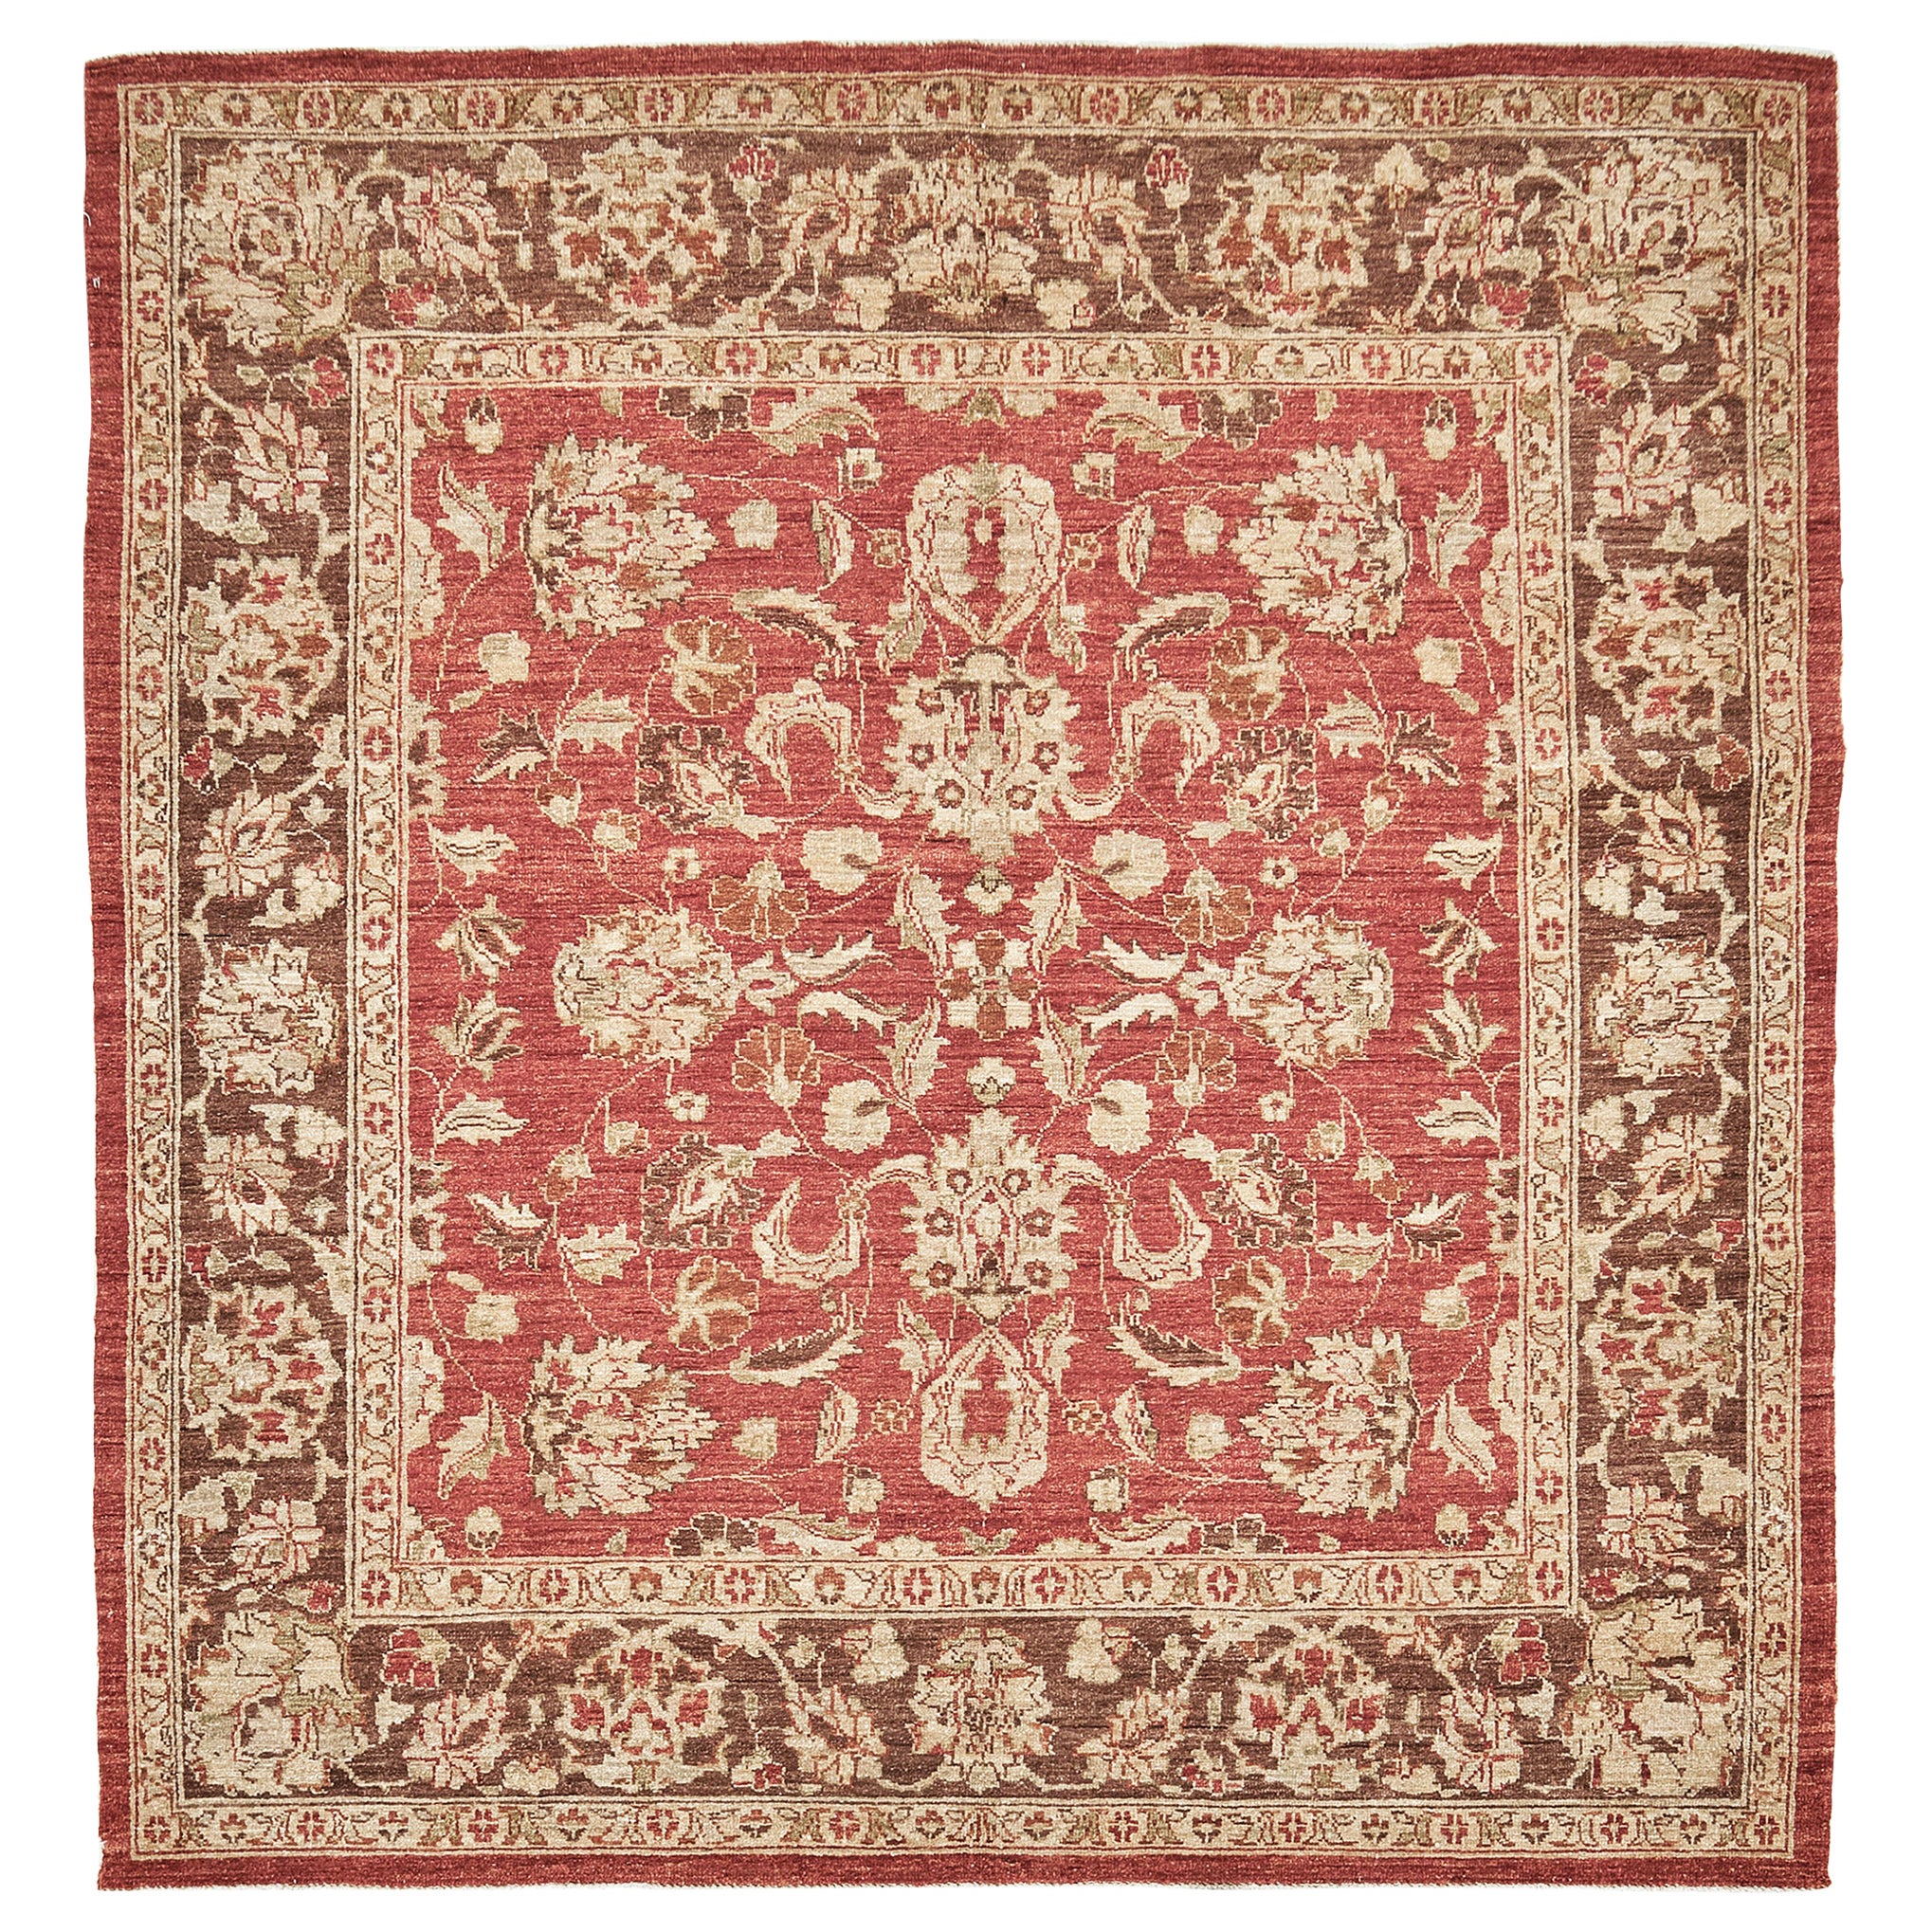 Natural Dye Sultanabad Revival Square Rug For Sale